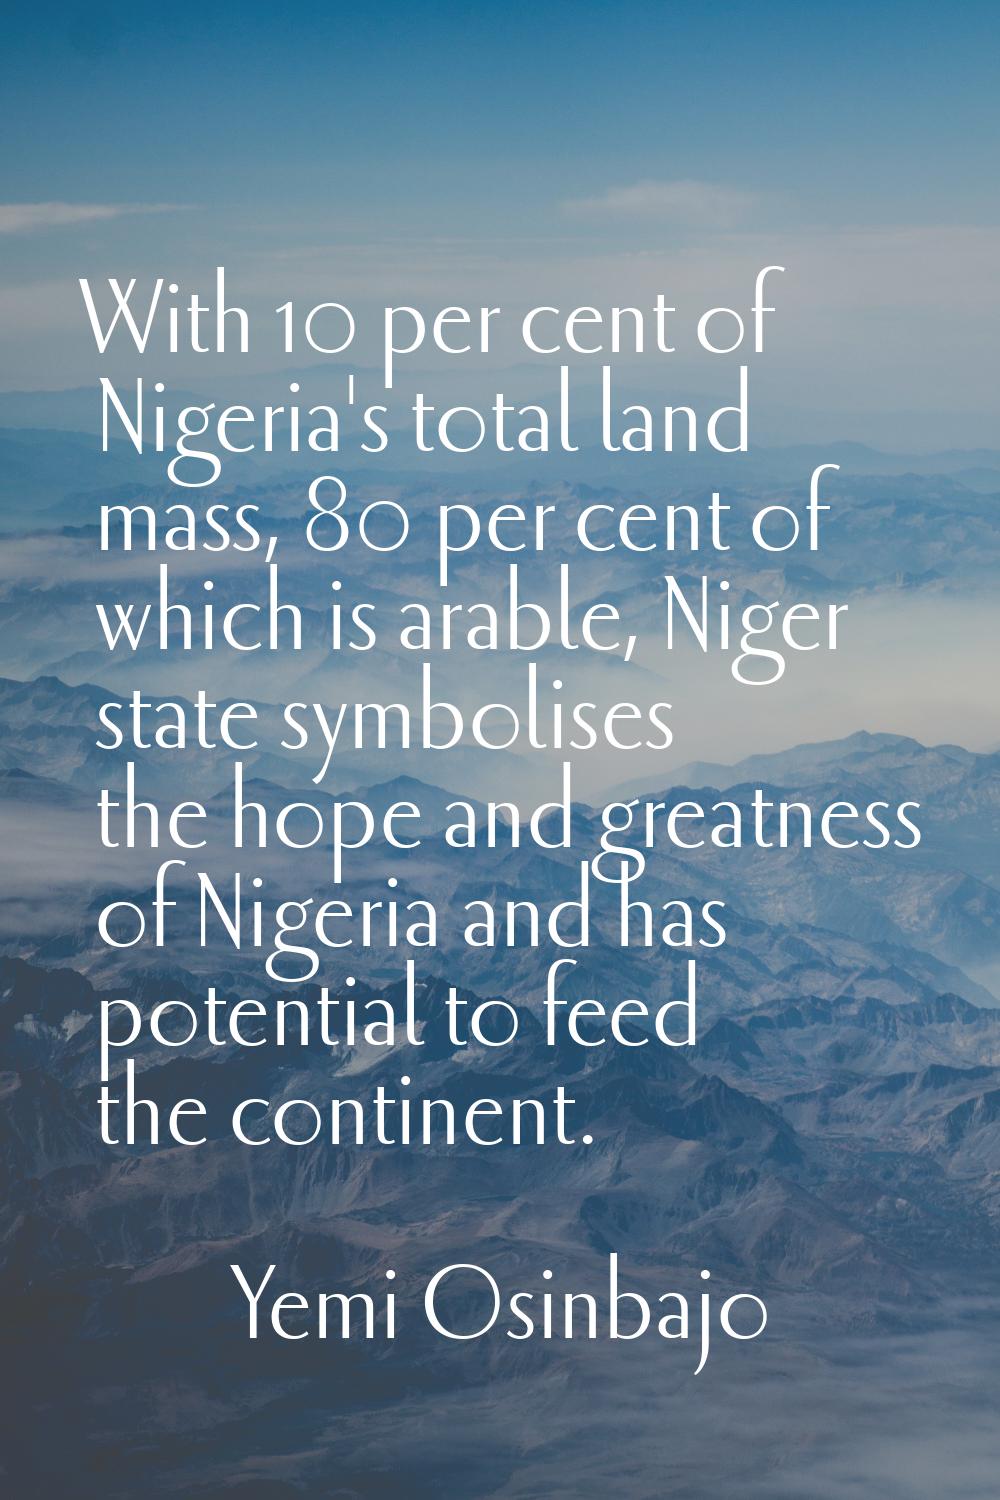 With 10 per cent of Nigeria's total land mass, 80 per cent of which is arable, Niger state symbolis